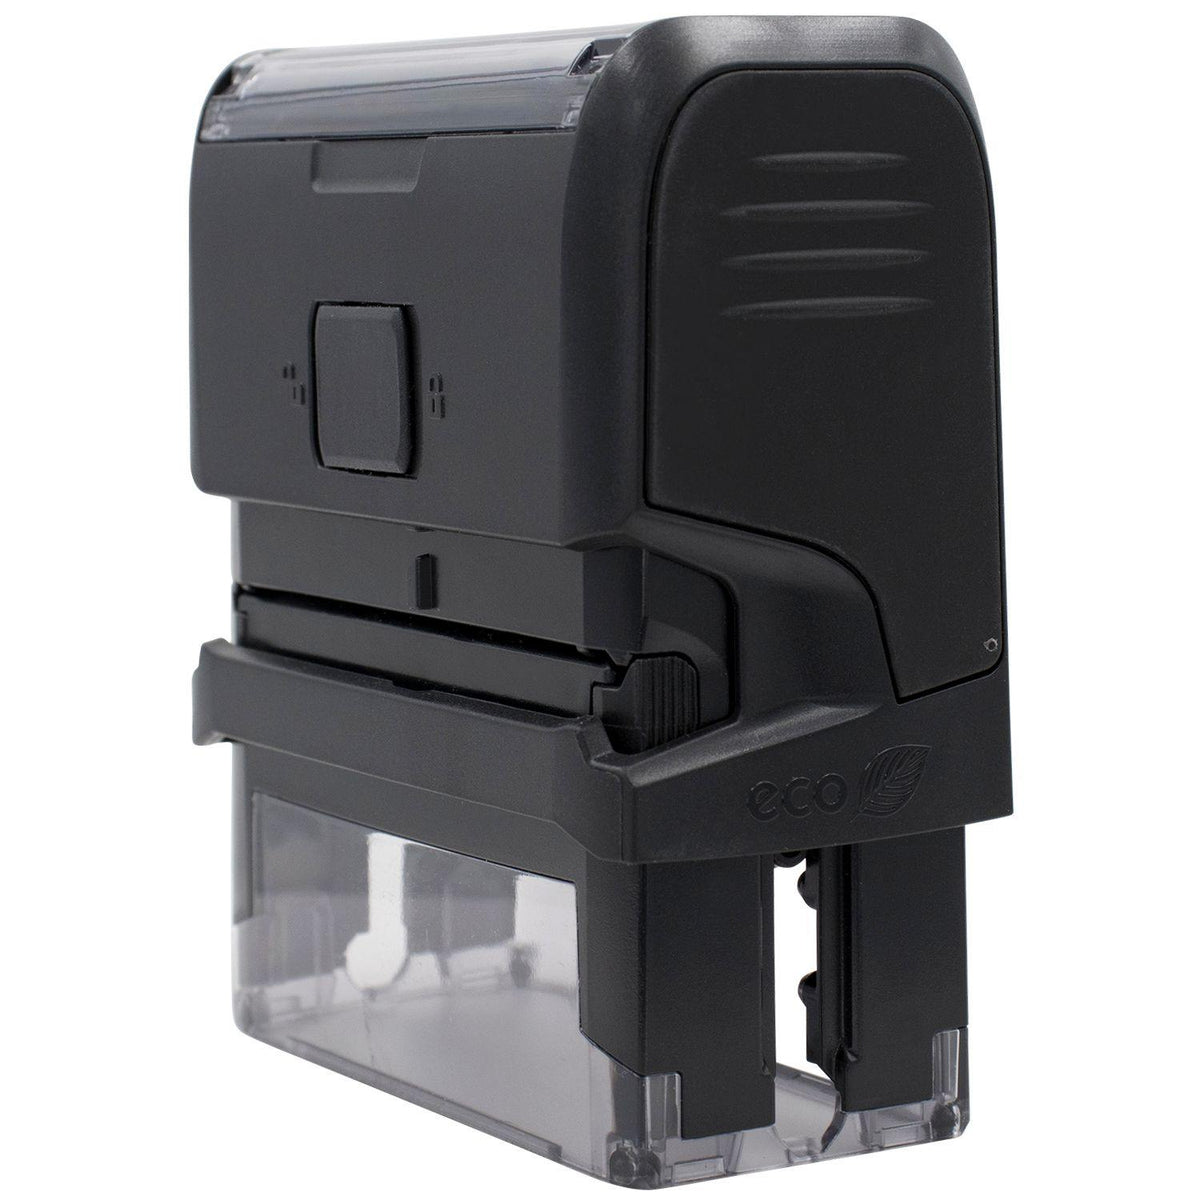 Large Self-Inking Social Distancing 6 Feet Stamp - Engineer Seal Stamps - Brand_Trodat, Impression Size_Large, Stamp Type_Self-Inking Stamp, Type of Use_General, Type of Use_Medical Office